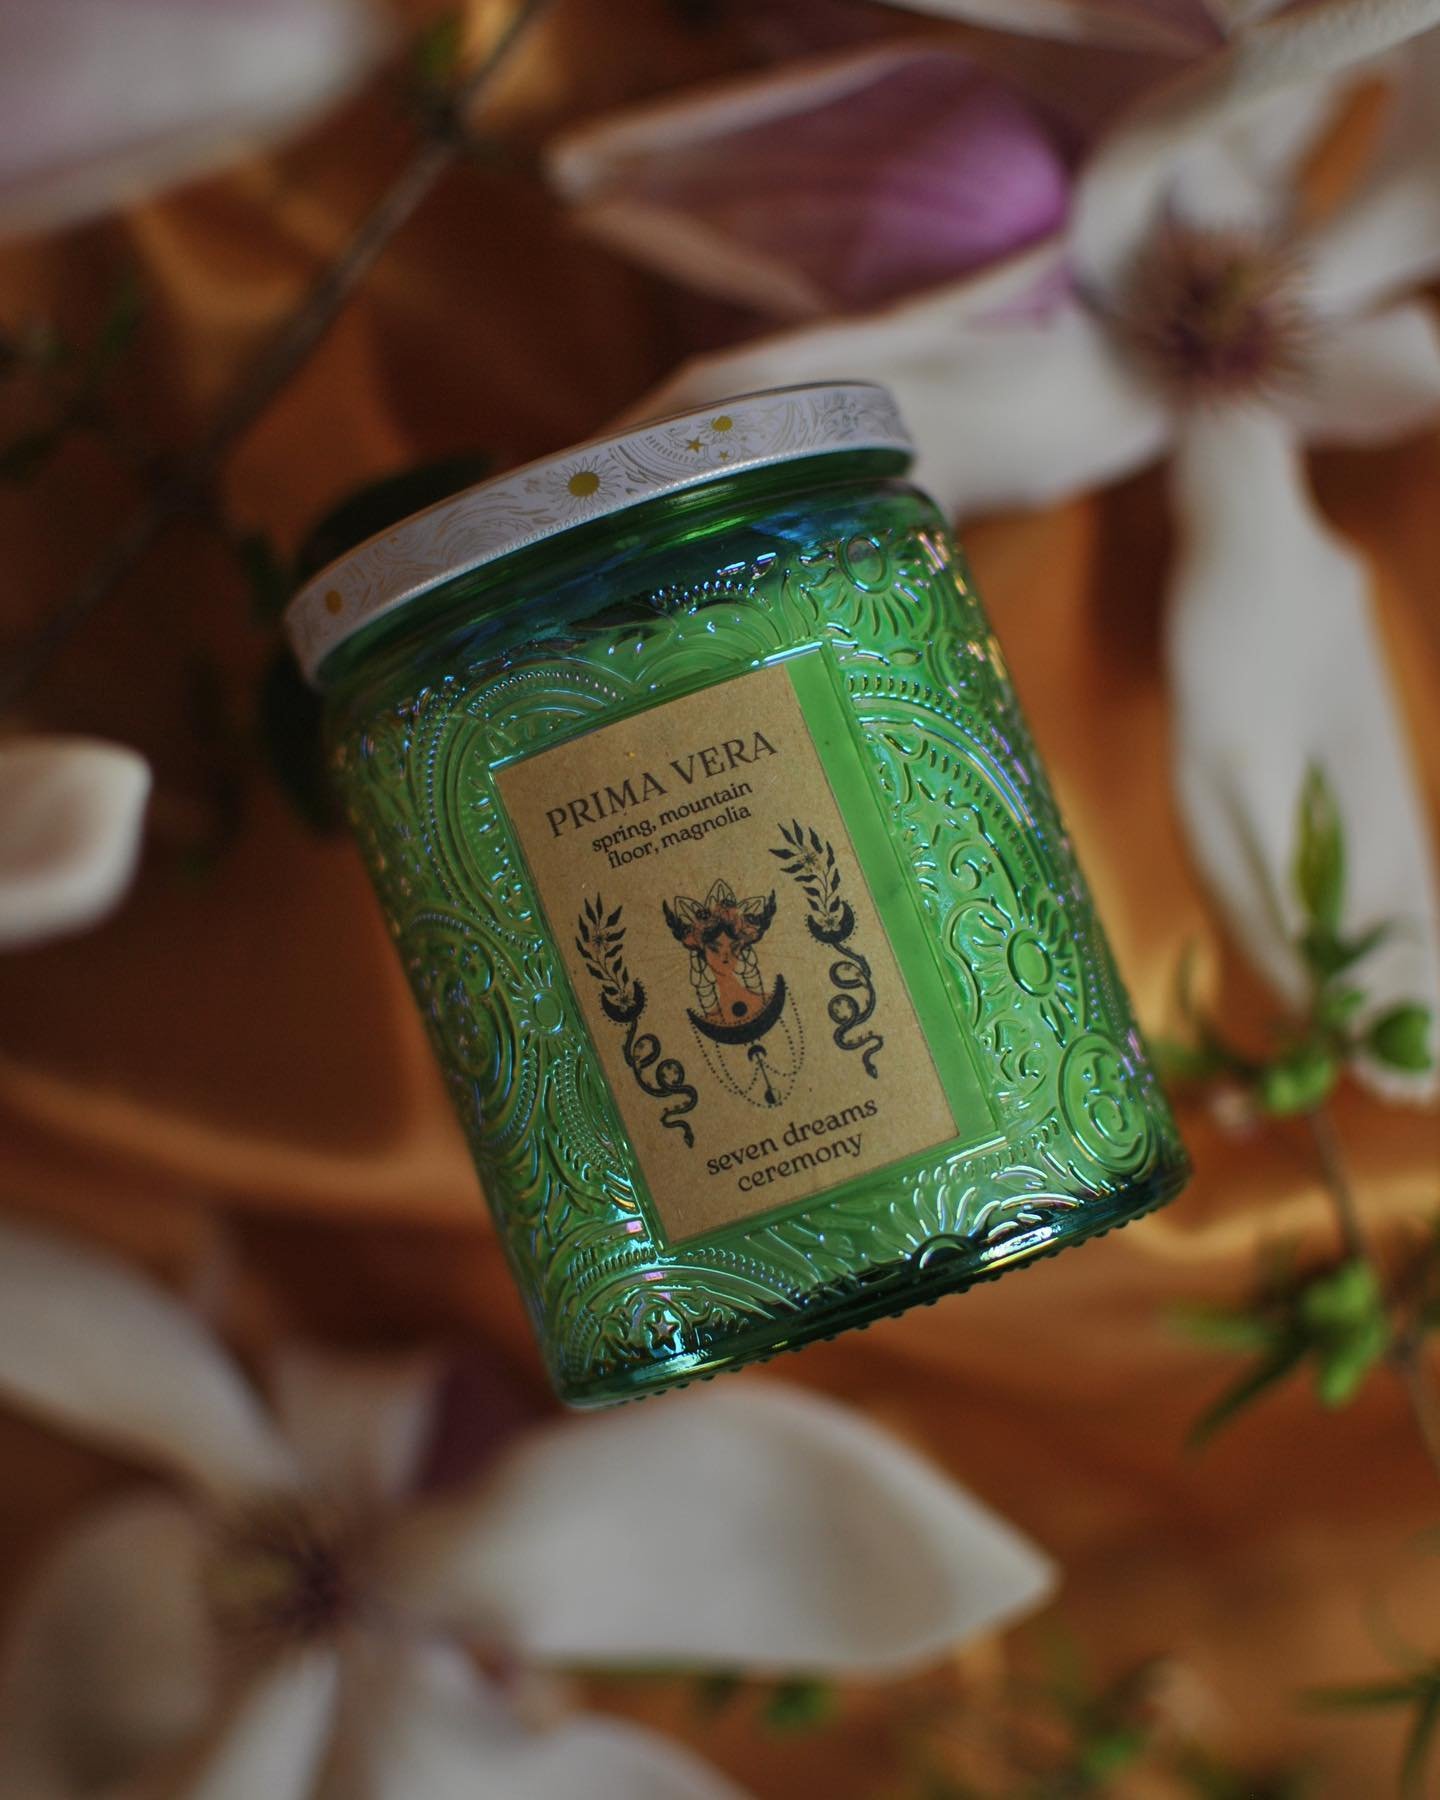 experience the scent + energy of peak spring, as crafted by x&oacute;chitl of @sevendreamsceremony.

💐 words from the creator of this beautiful, limited-batch candle: 

&ldquo;I bring you a candle that burns away the winter and invites the sun in. f